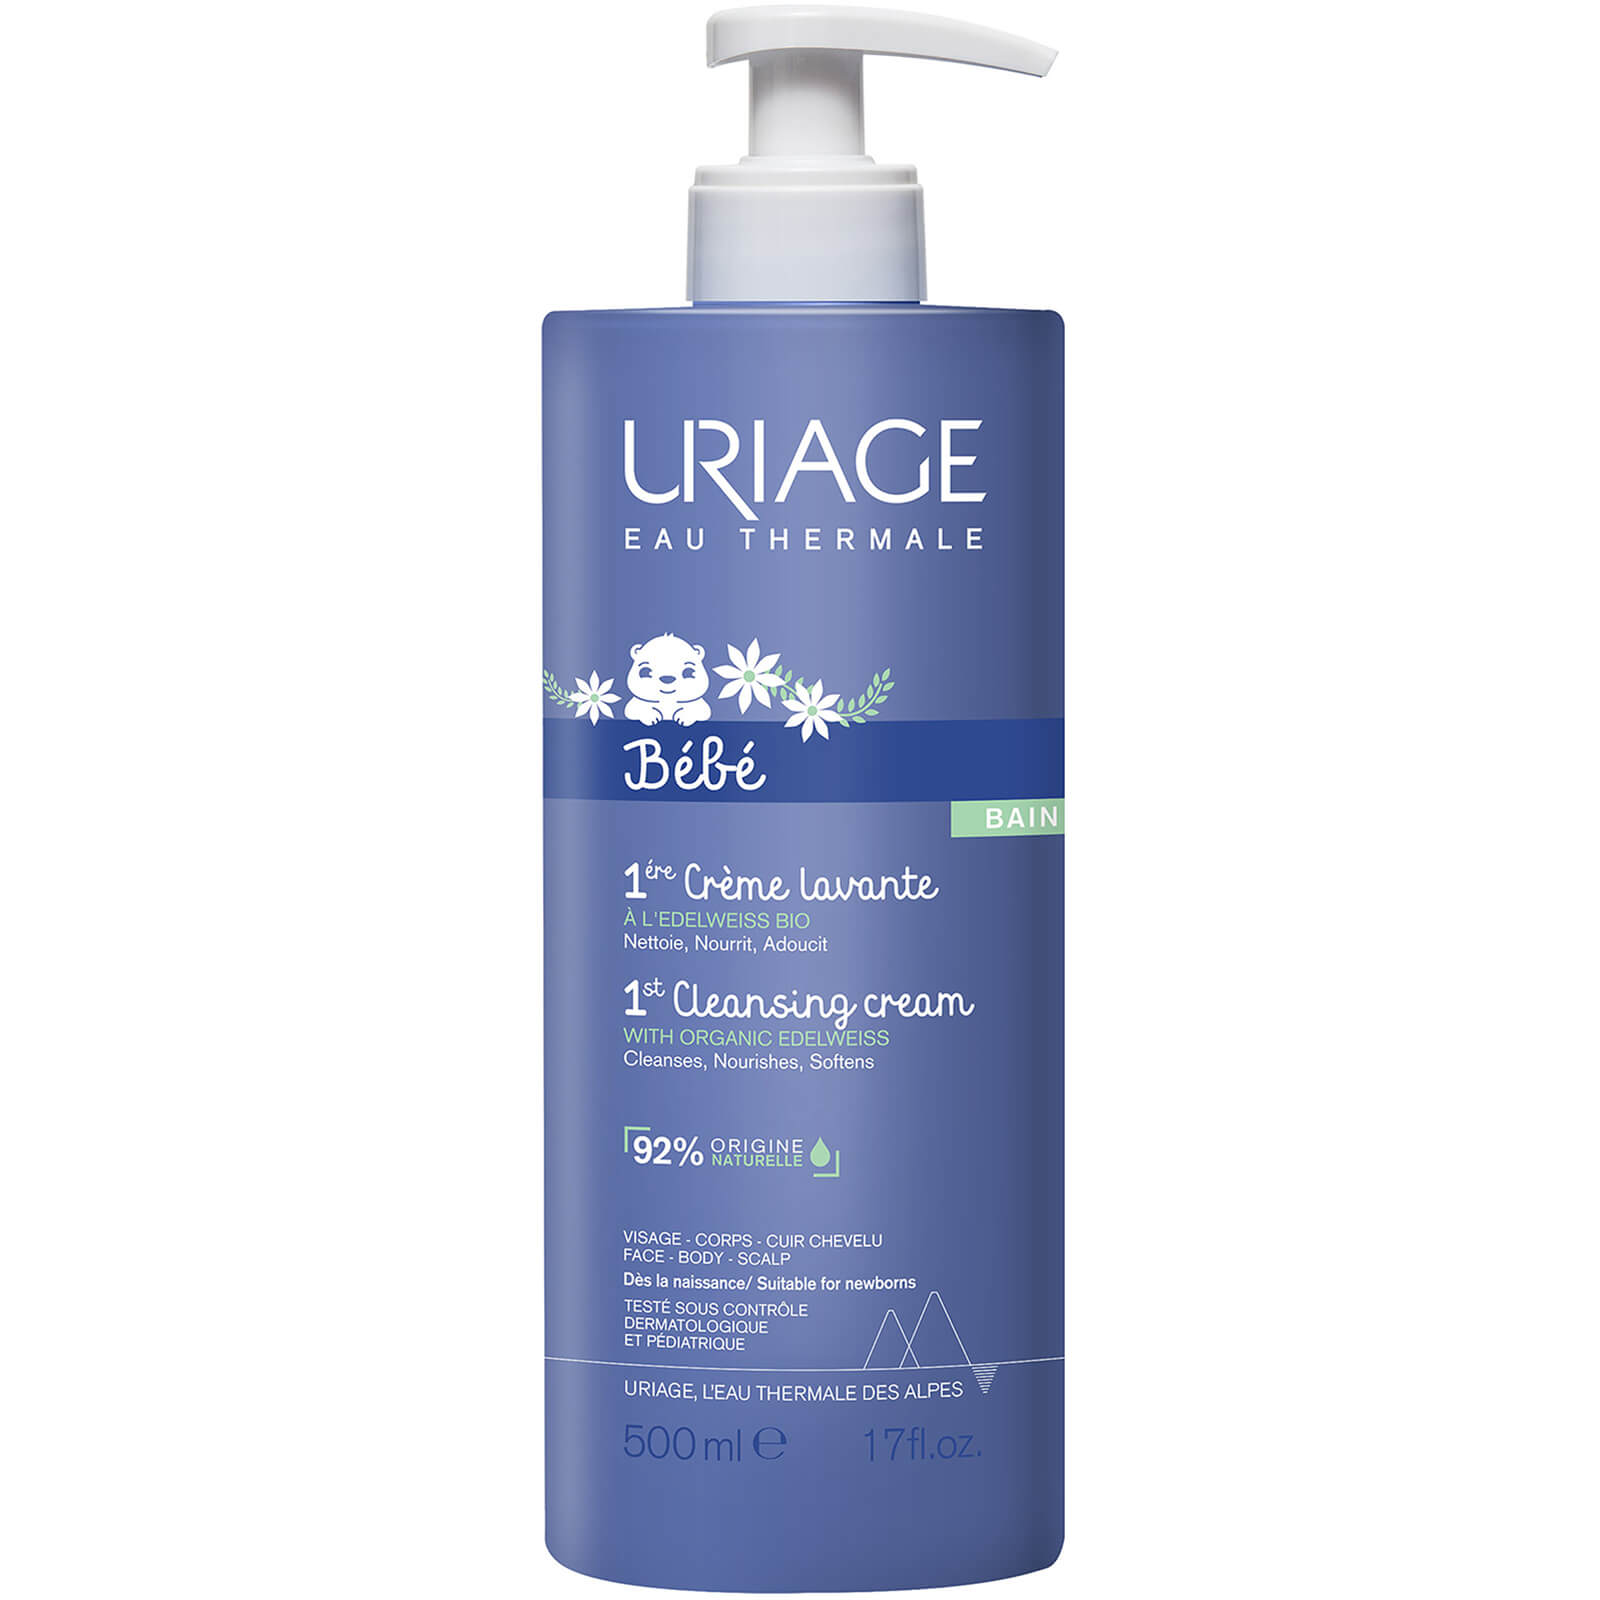 Uriage Soap Free Cleansing crema for viso, corpo and Scalp (500ml)